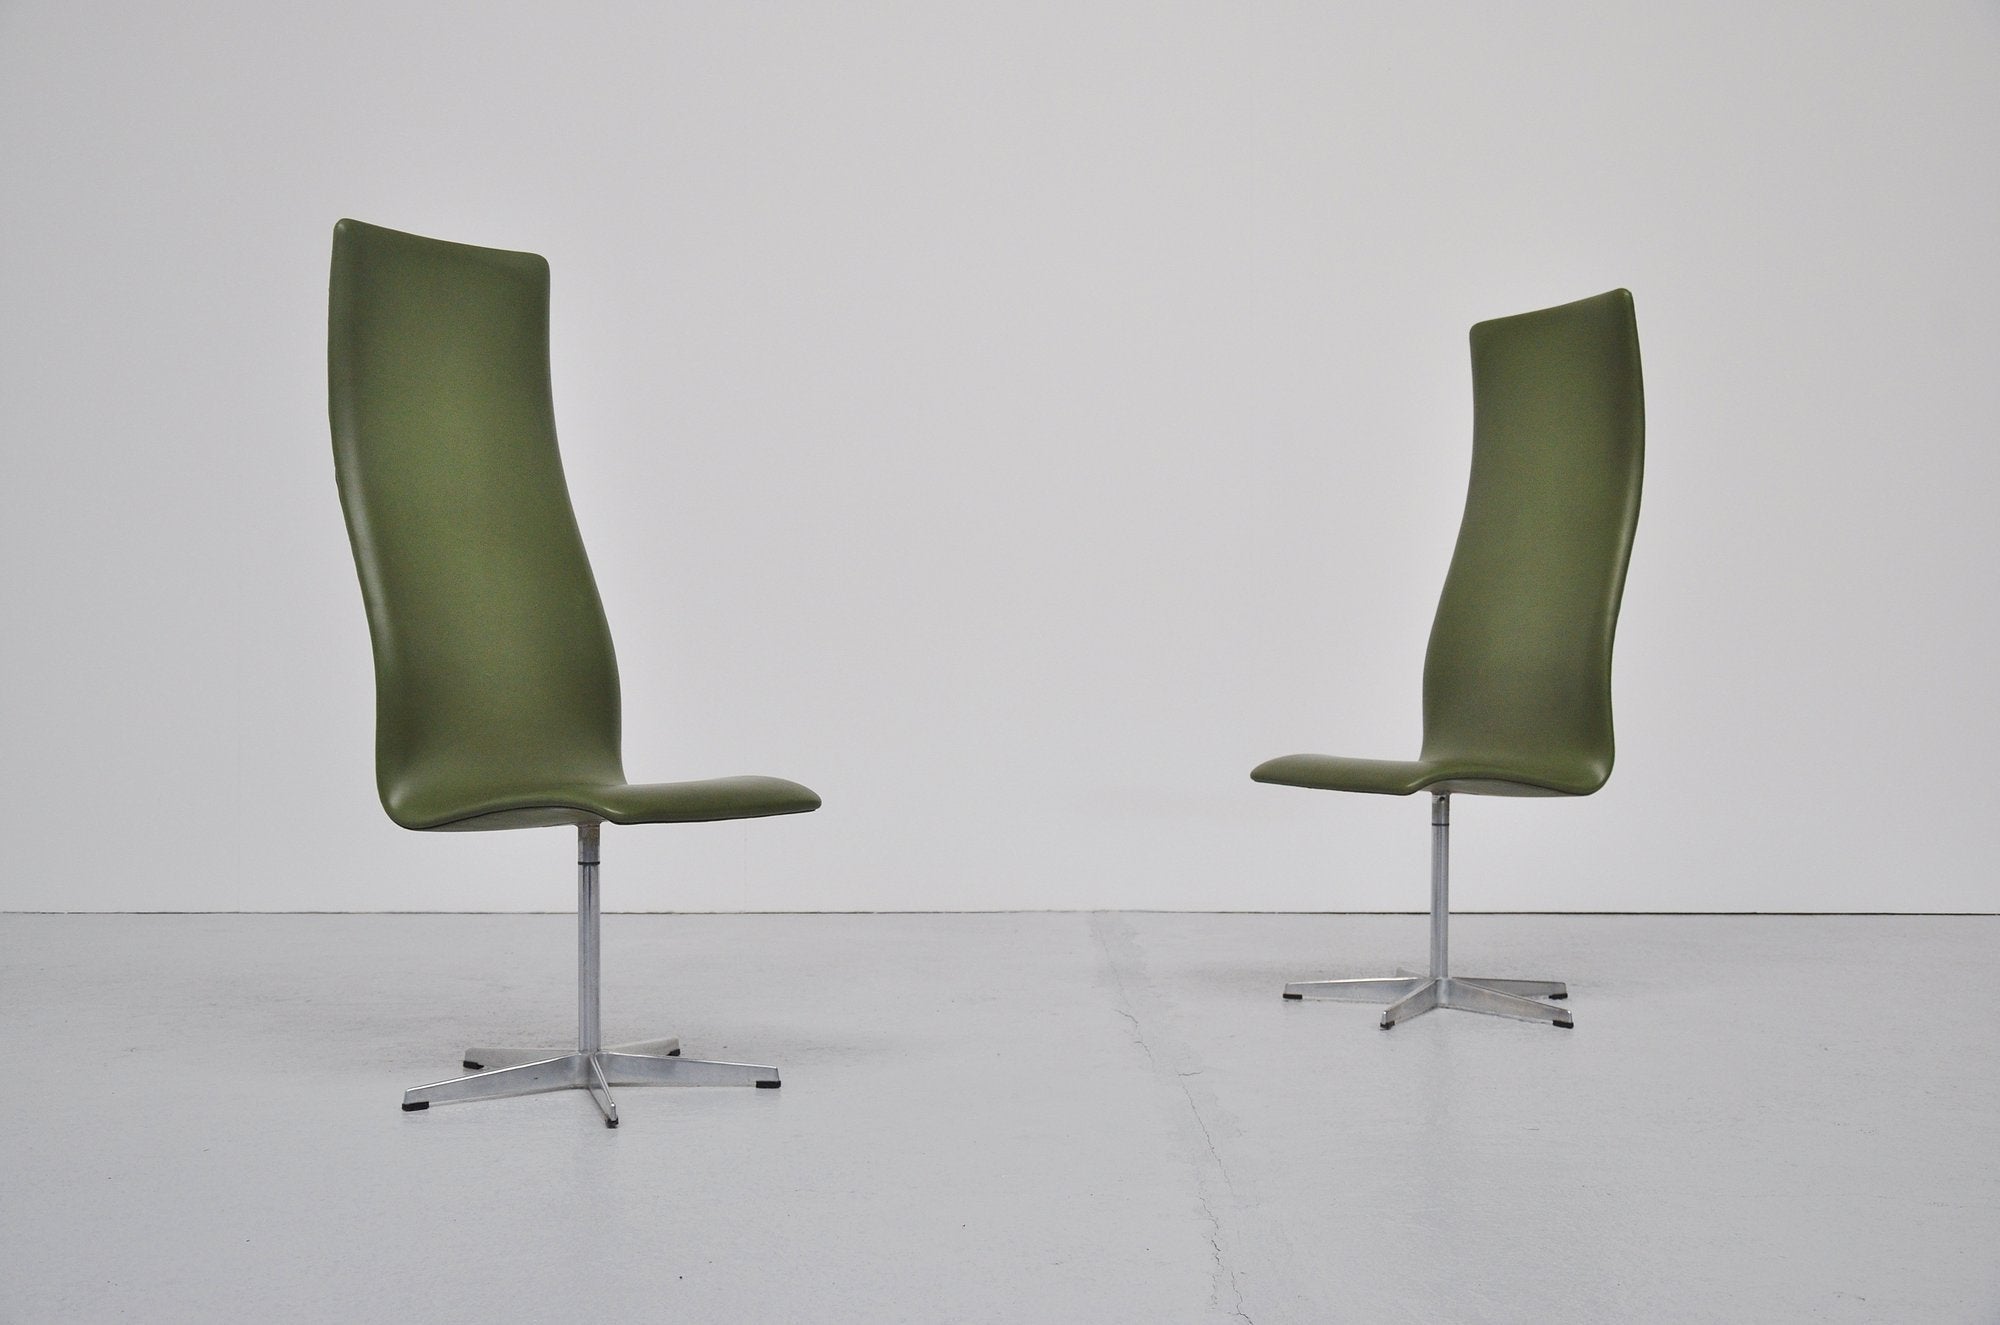 Arne Jacobsen Oxford chairs pair in green vynil 1962